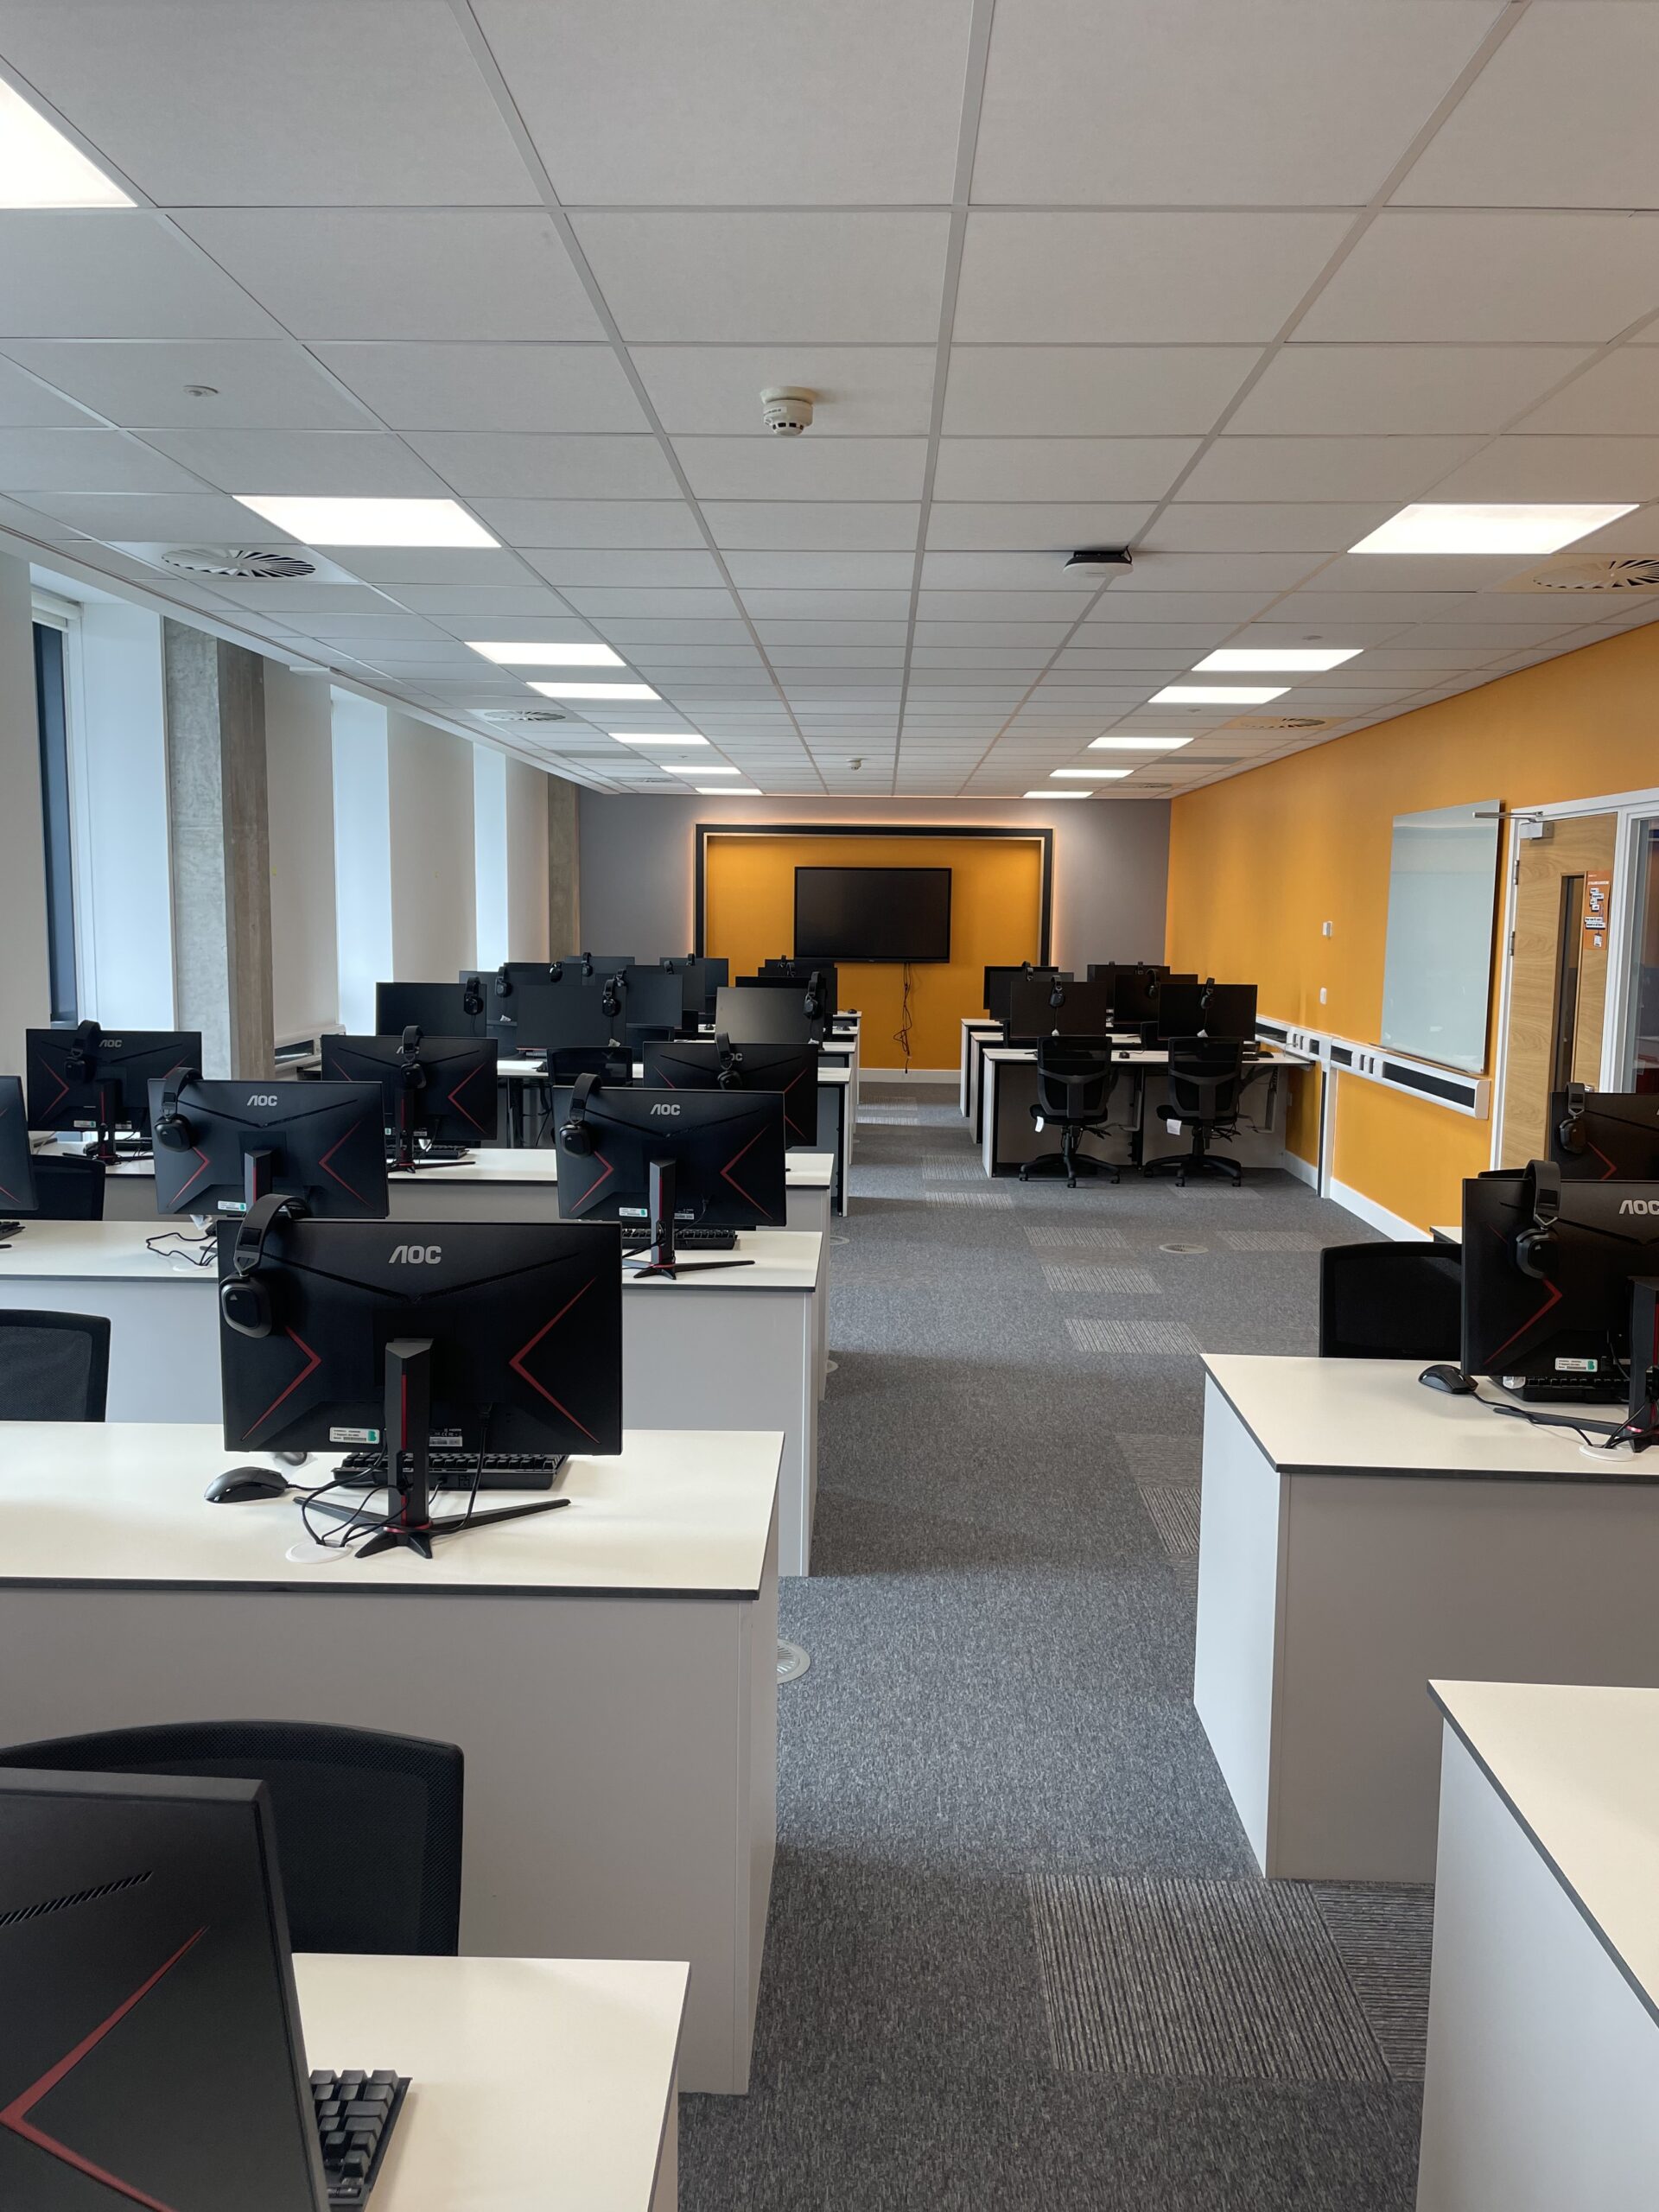 An IT suite at Bradford College